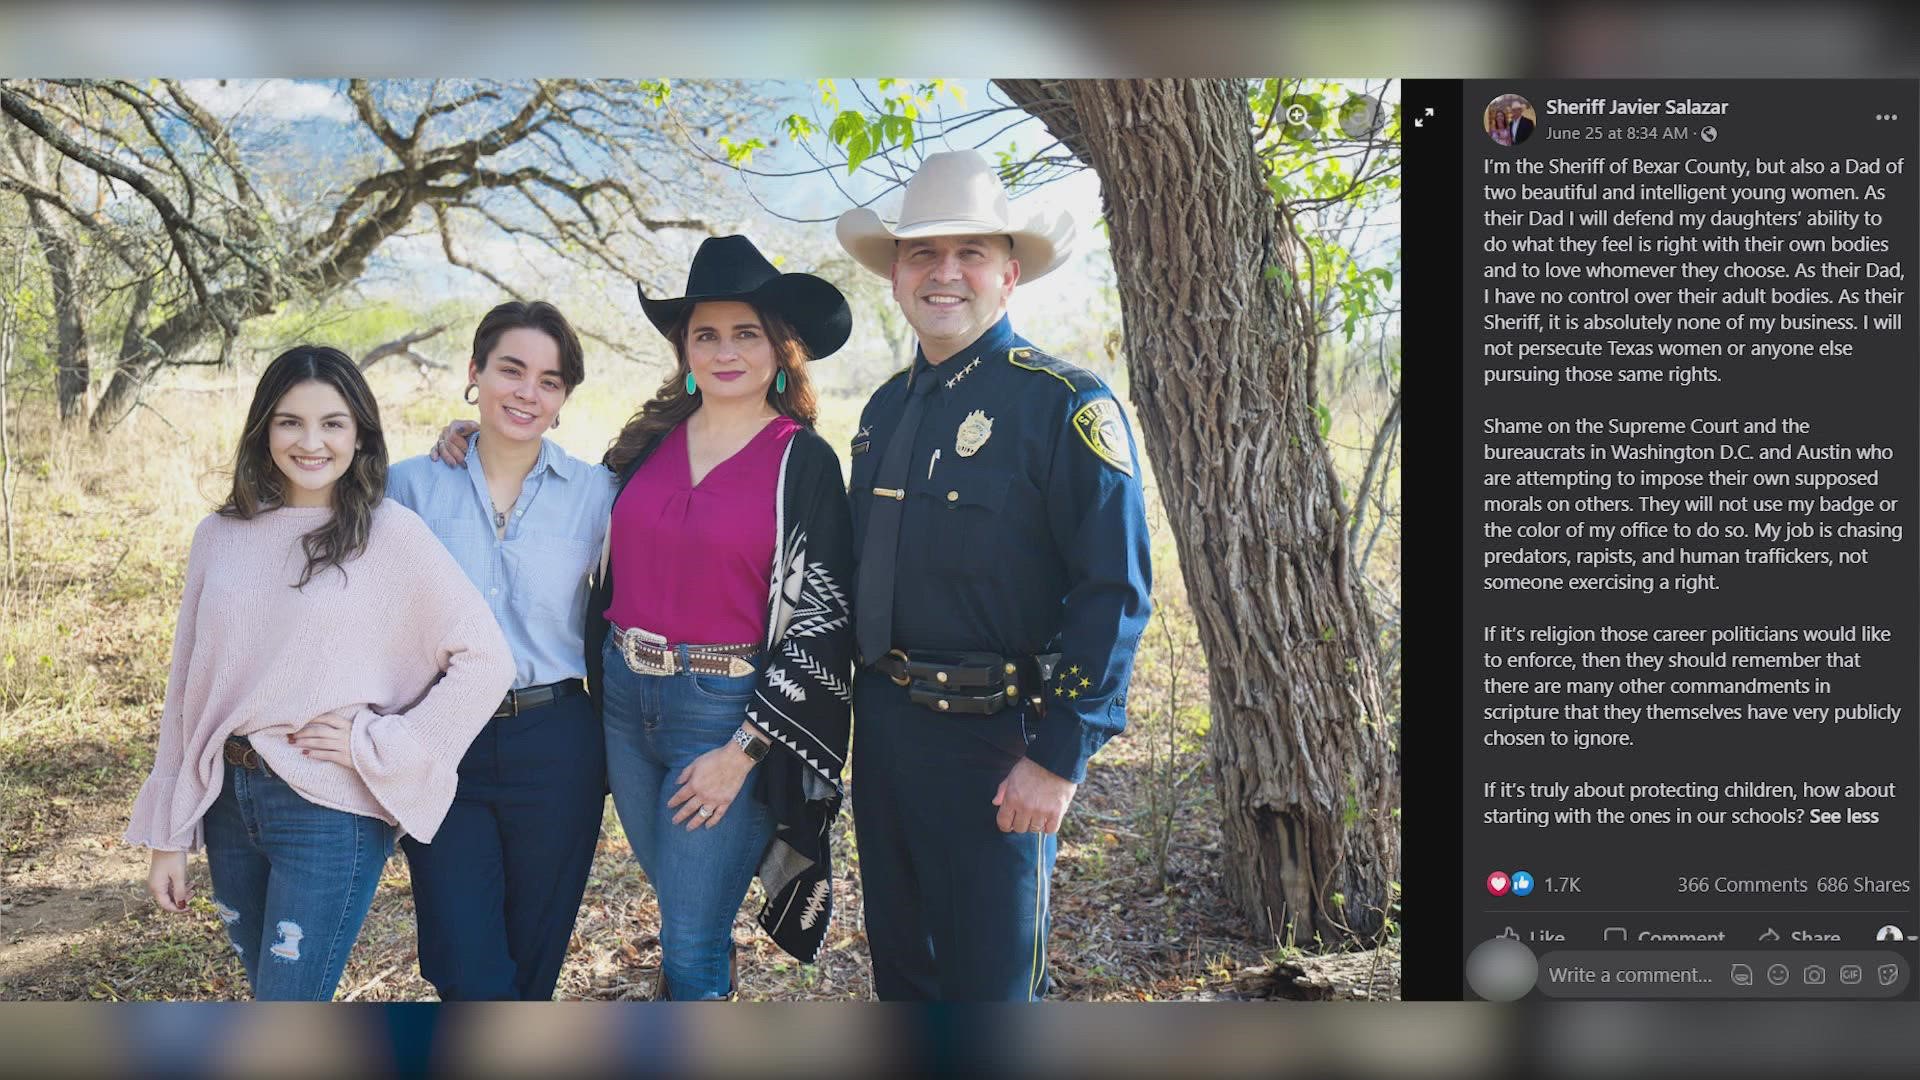 Sheriff Javier Salazar said as a dad of two daughters, he will defend their ability to do what they feel is right with their bodies.